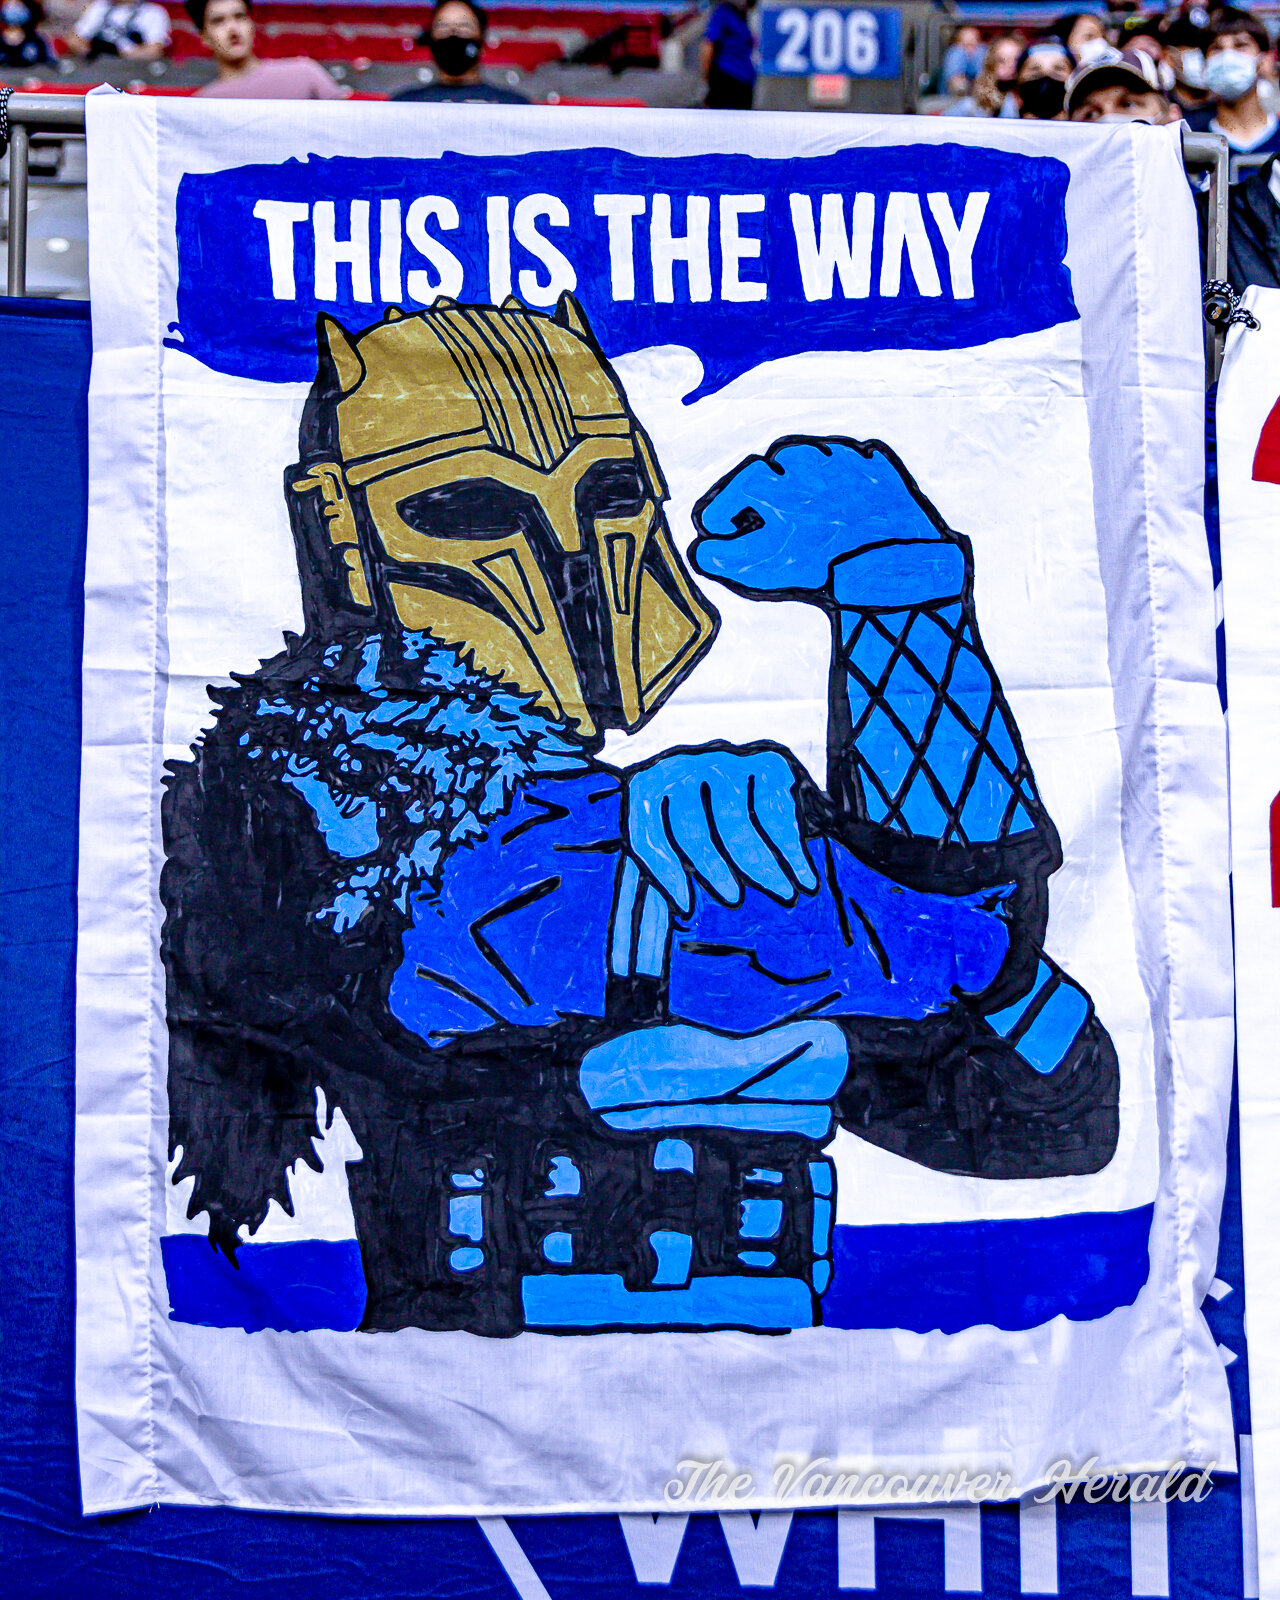 2021-08-29 Star Wars- The Mandalorian- This is the Way.jpg